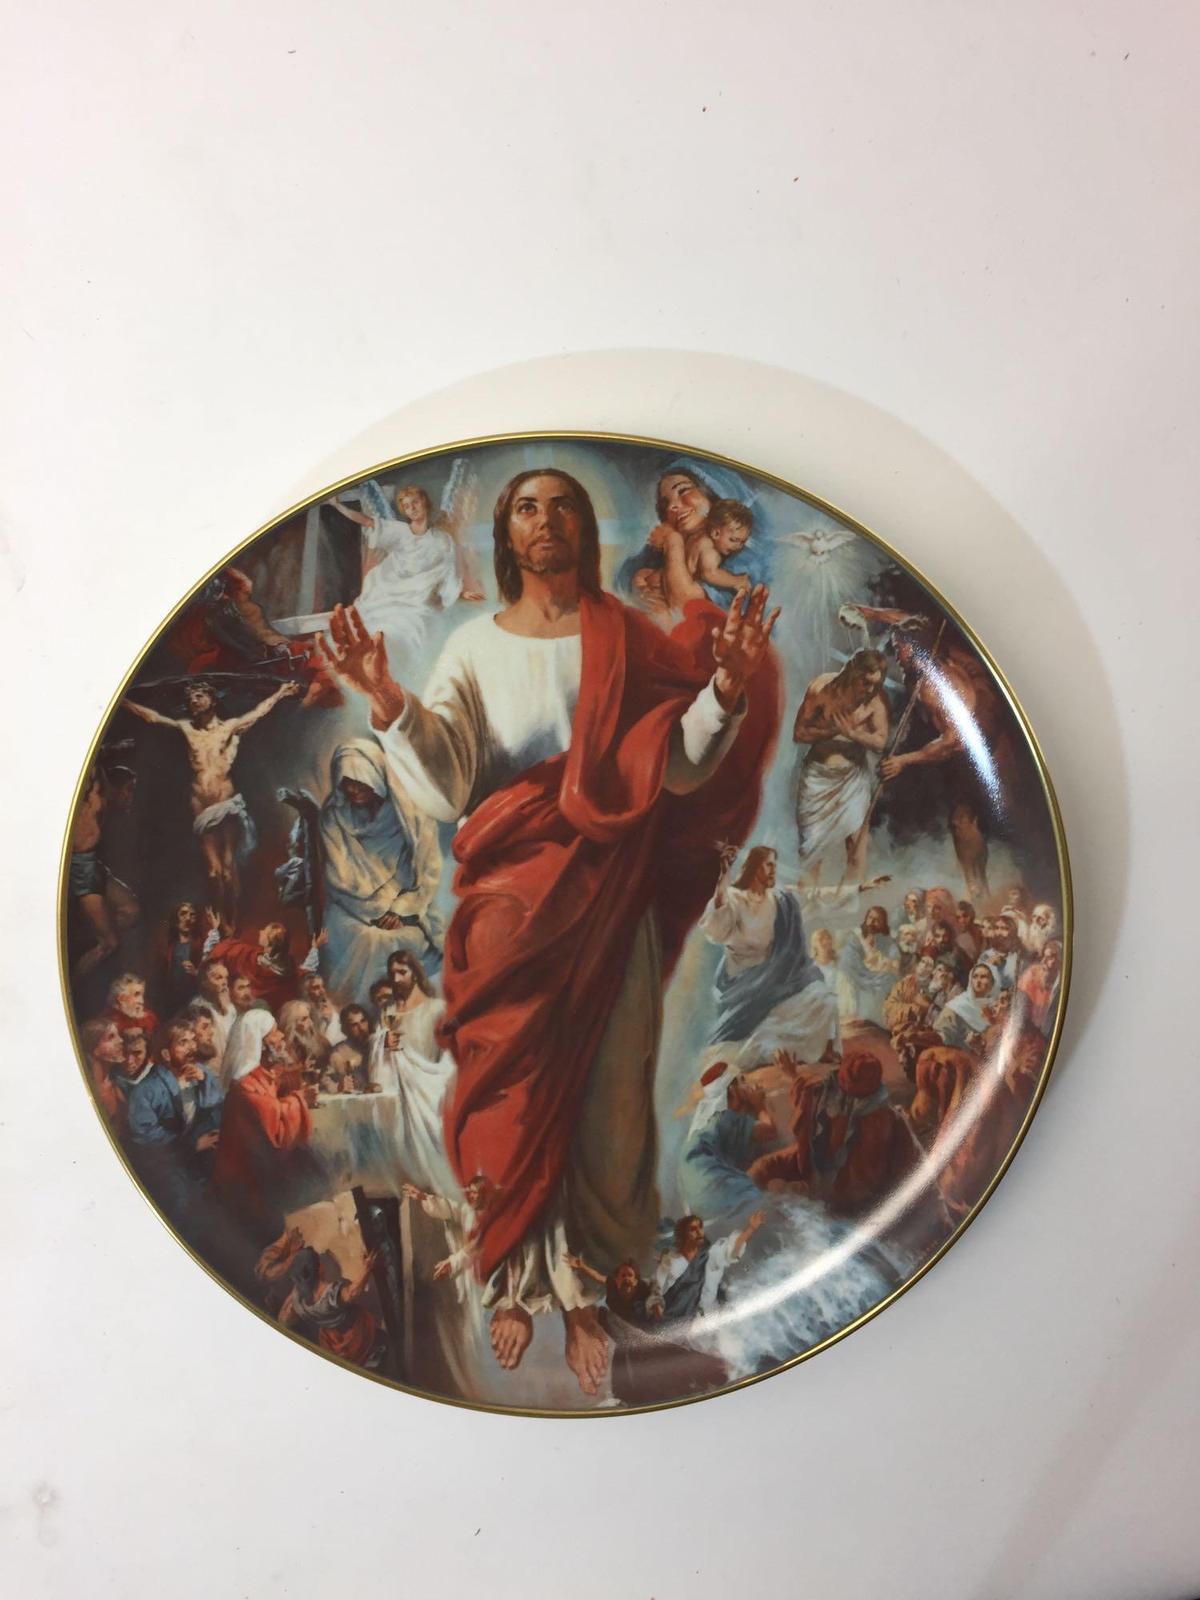 Limited Edition 12in Ceramic Plate - The Life of Christ by Stephan Juharos